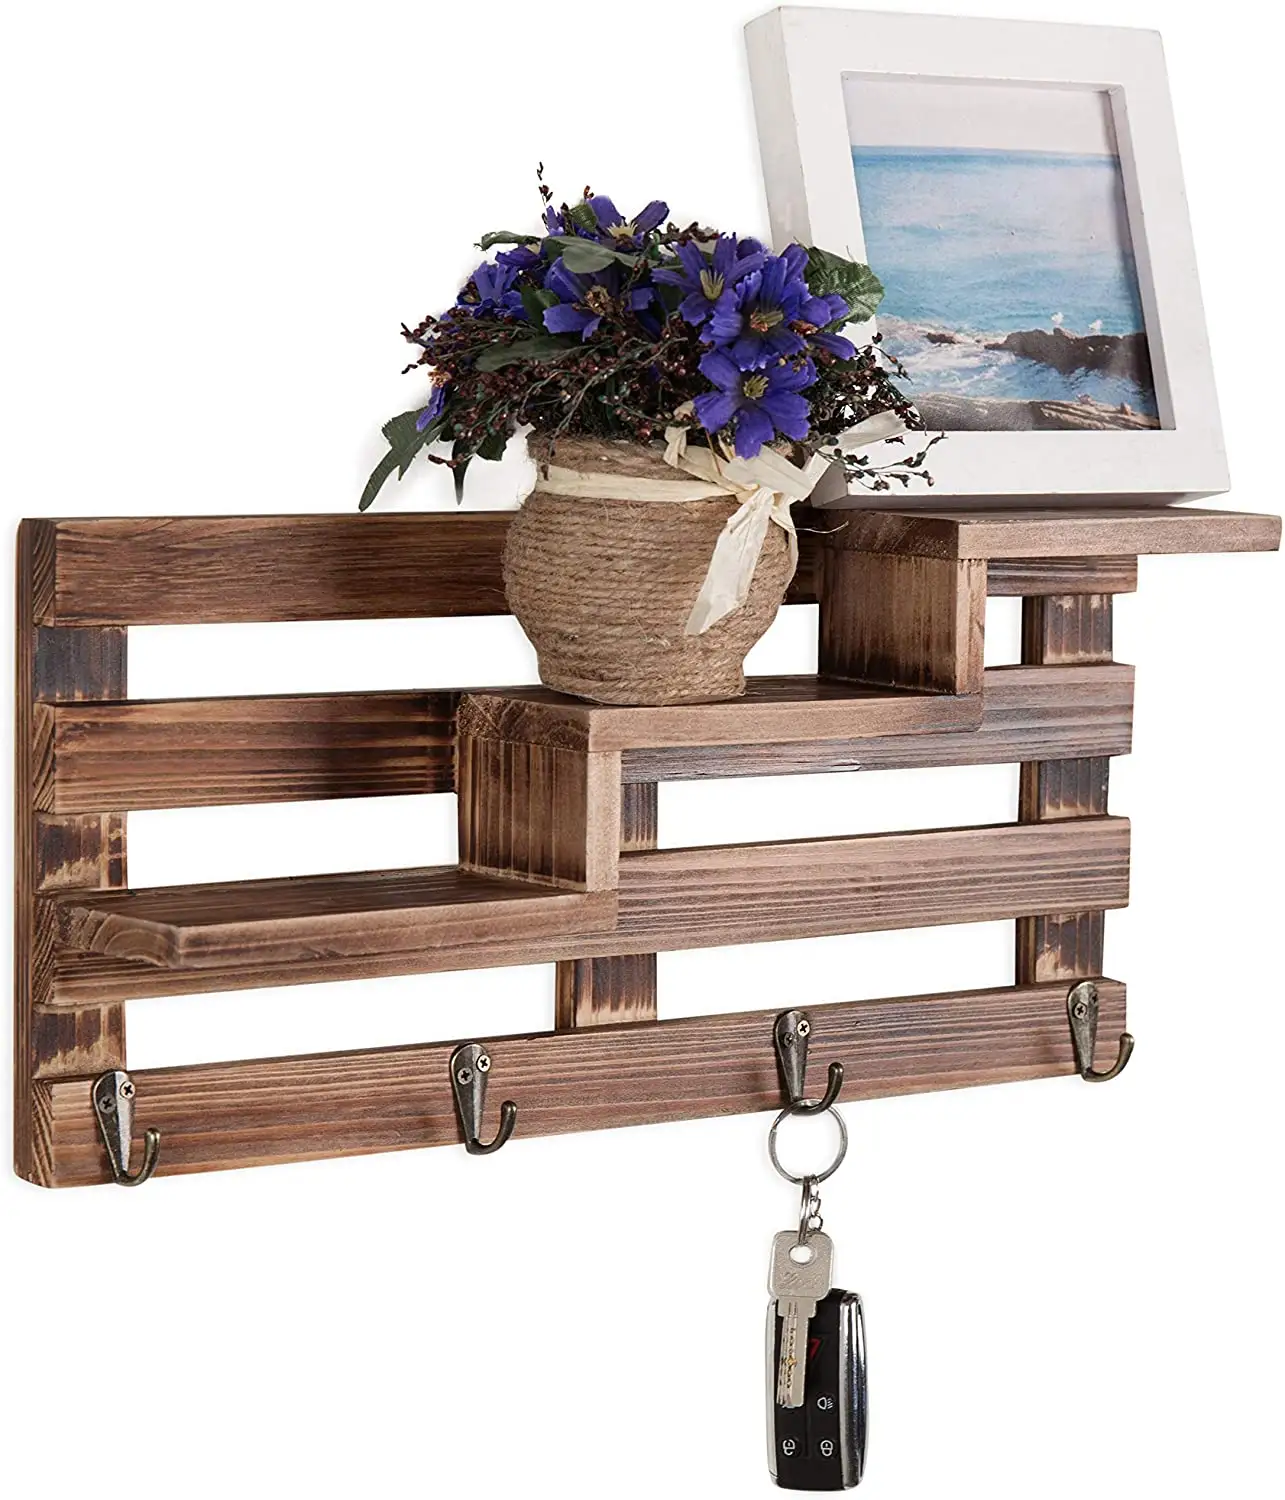 Rustic Wall Mounted Wooden Key Holder Rack Mail Sorter Organizer with 4 Double Key Hooks for Entryway